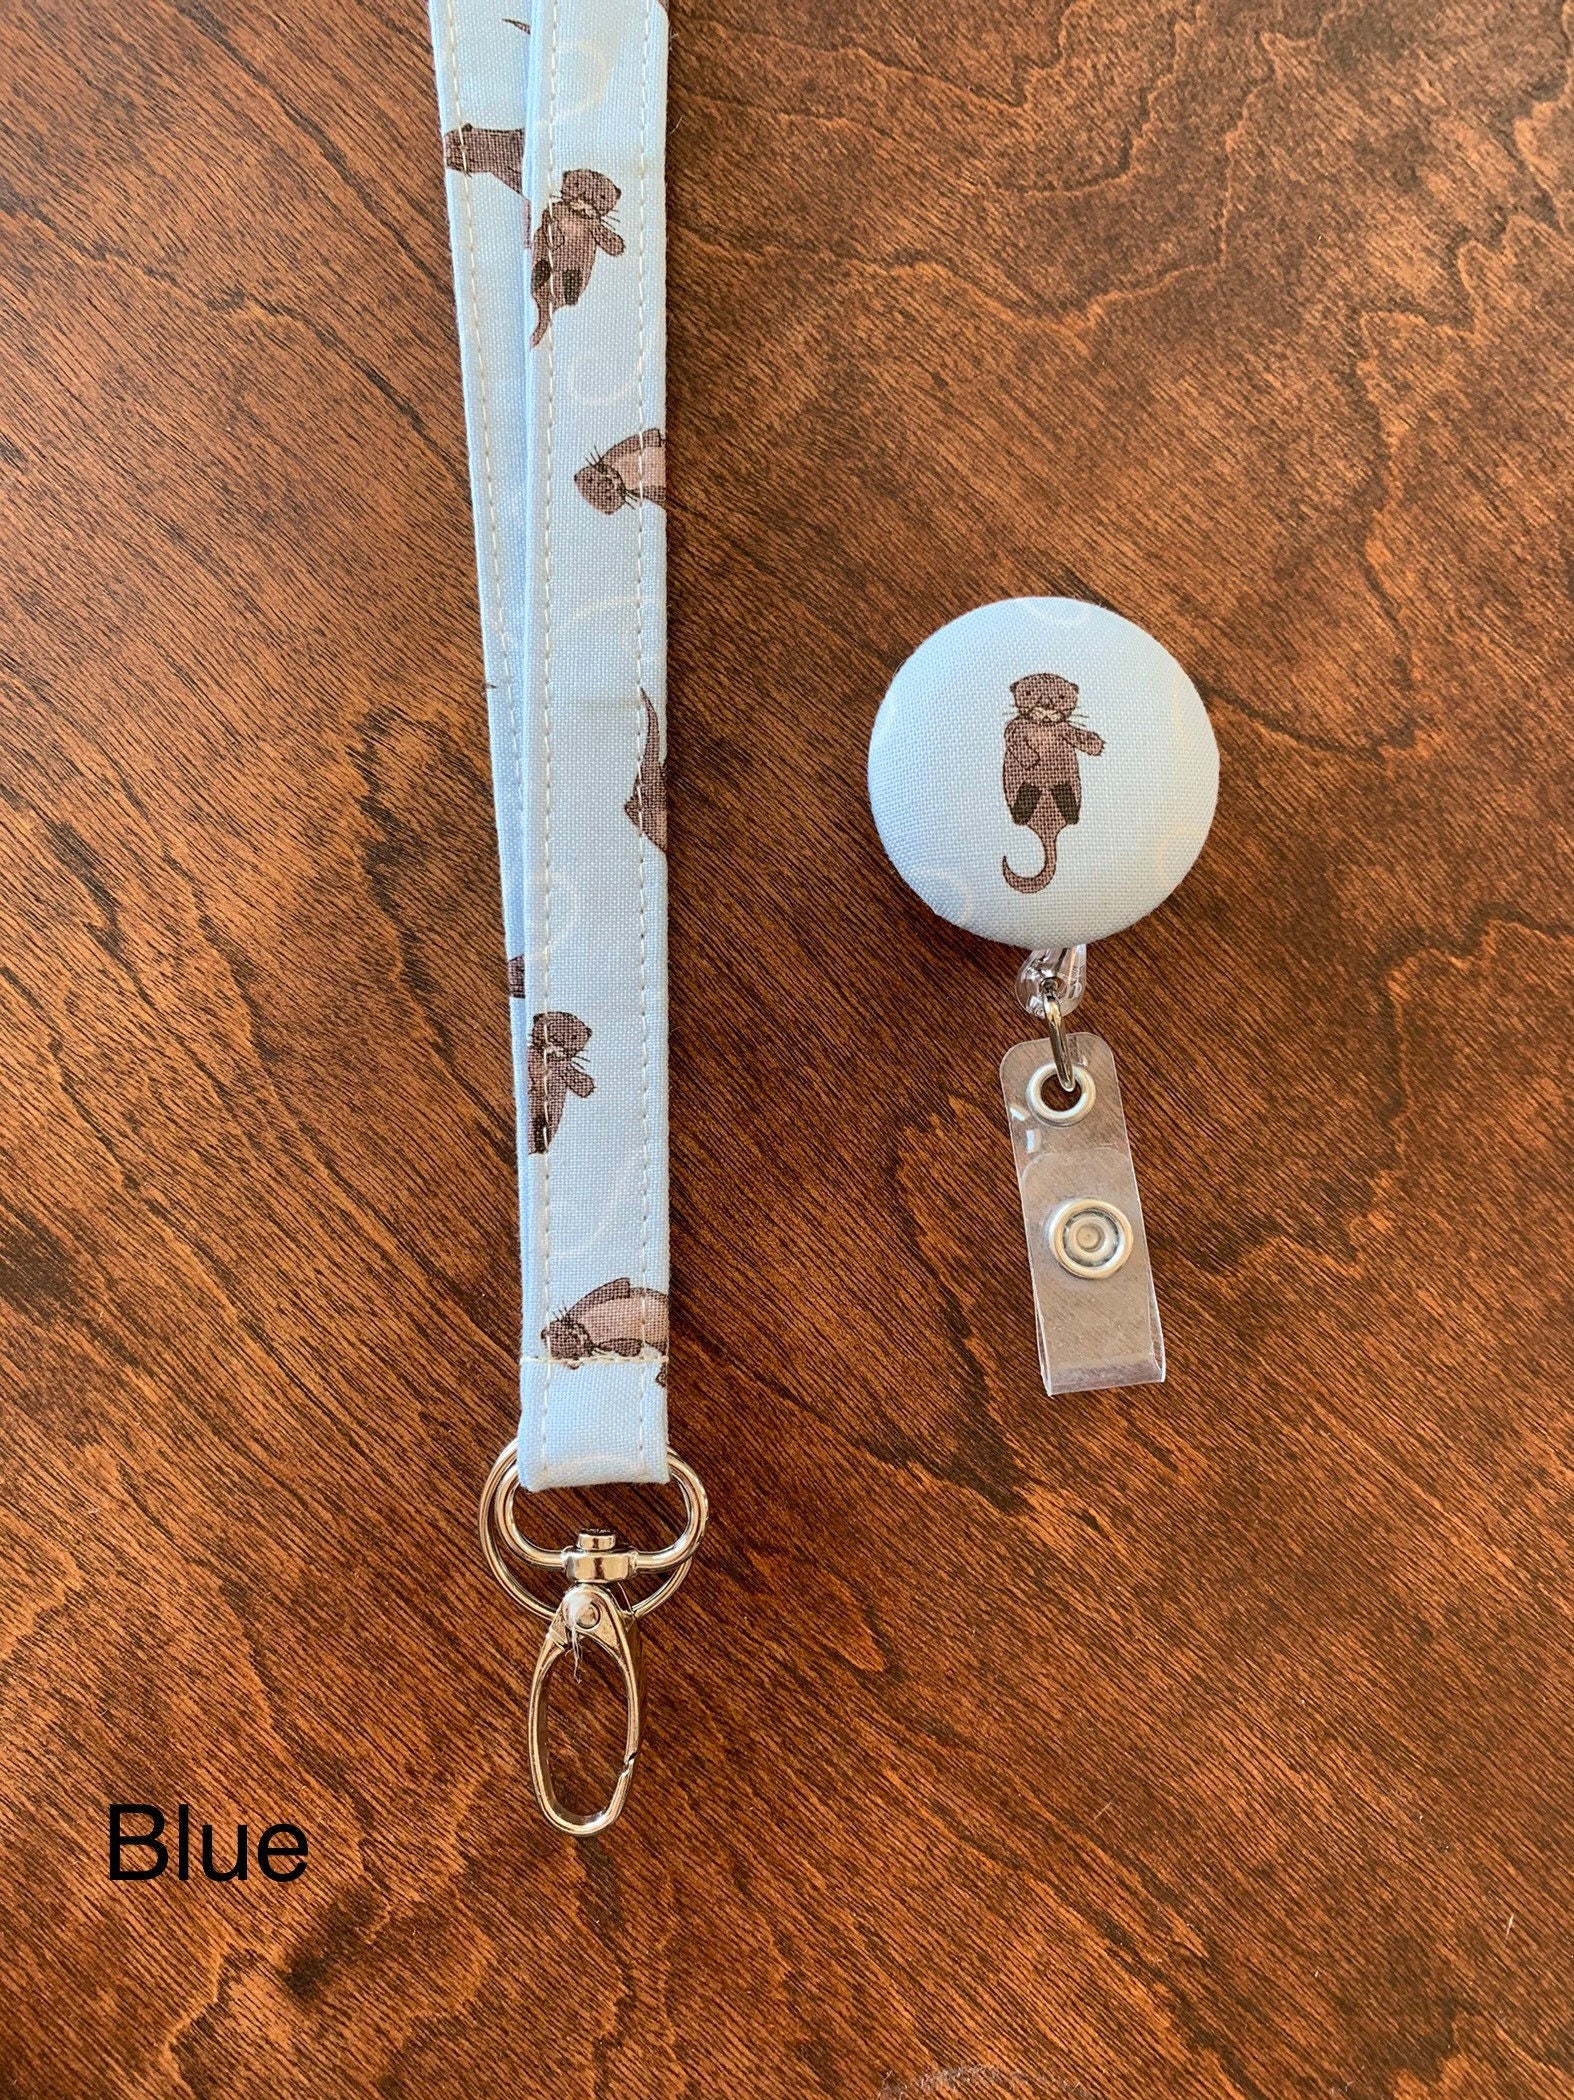 Otter lanyard in blue with a matching badge reel, Otter gift